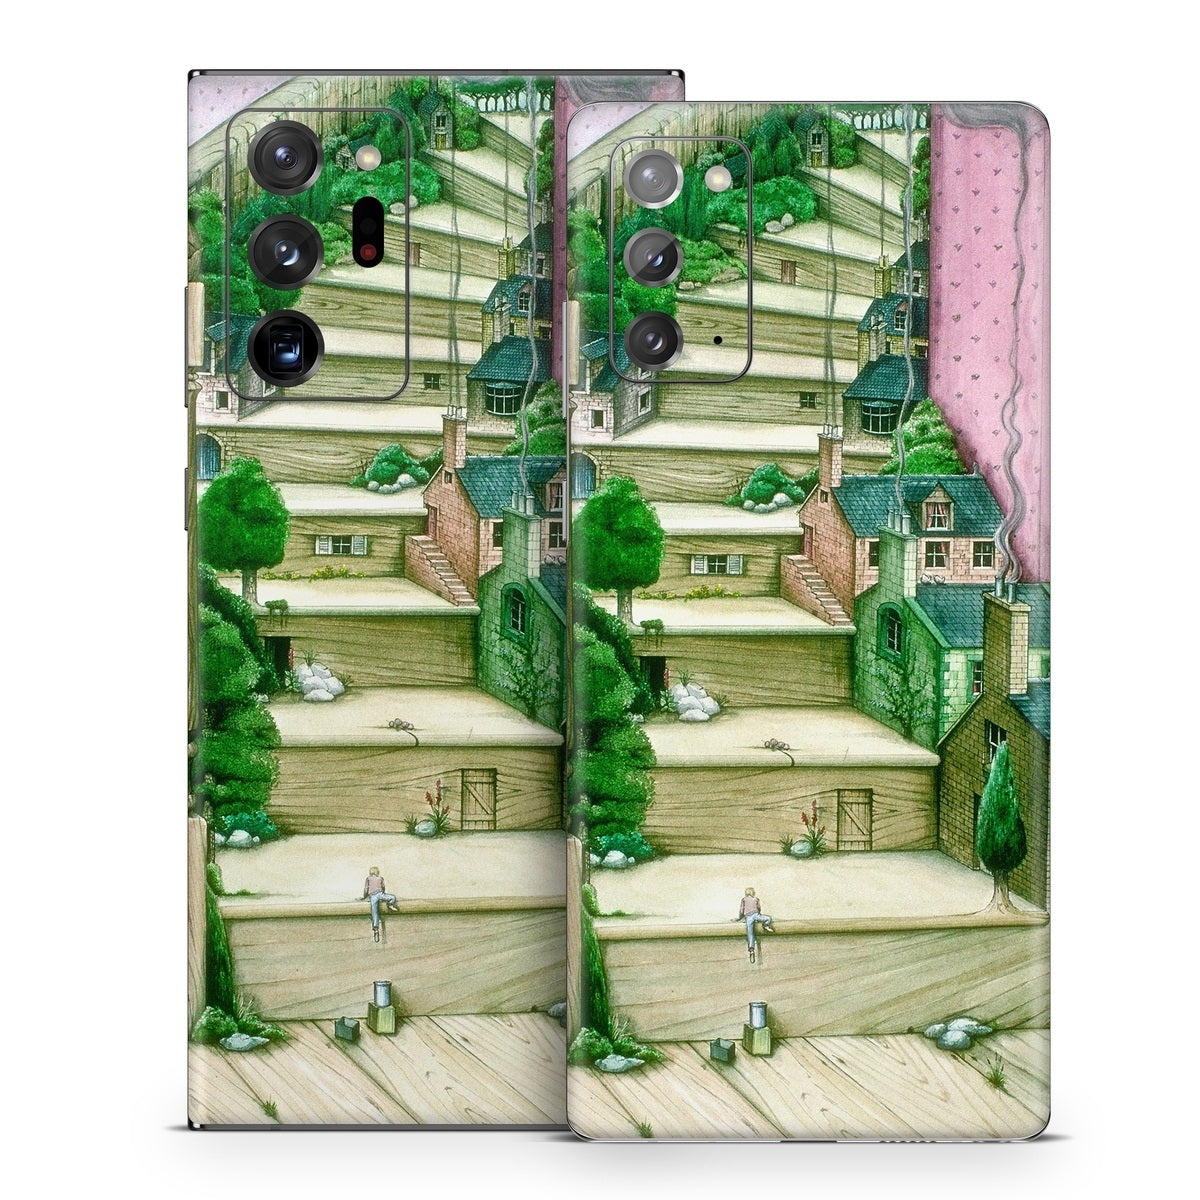 Living Stairs - Samsung Galaxy Note 20 Skin